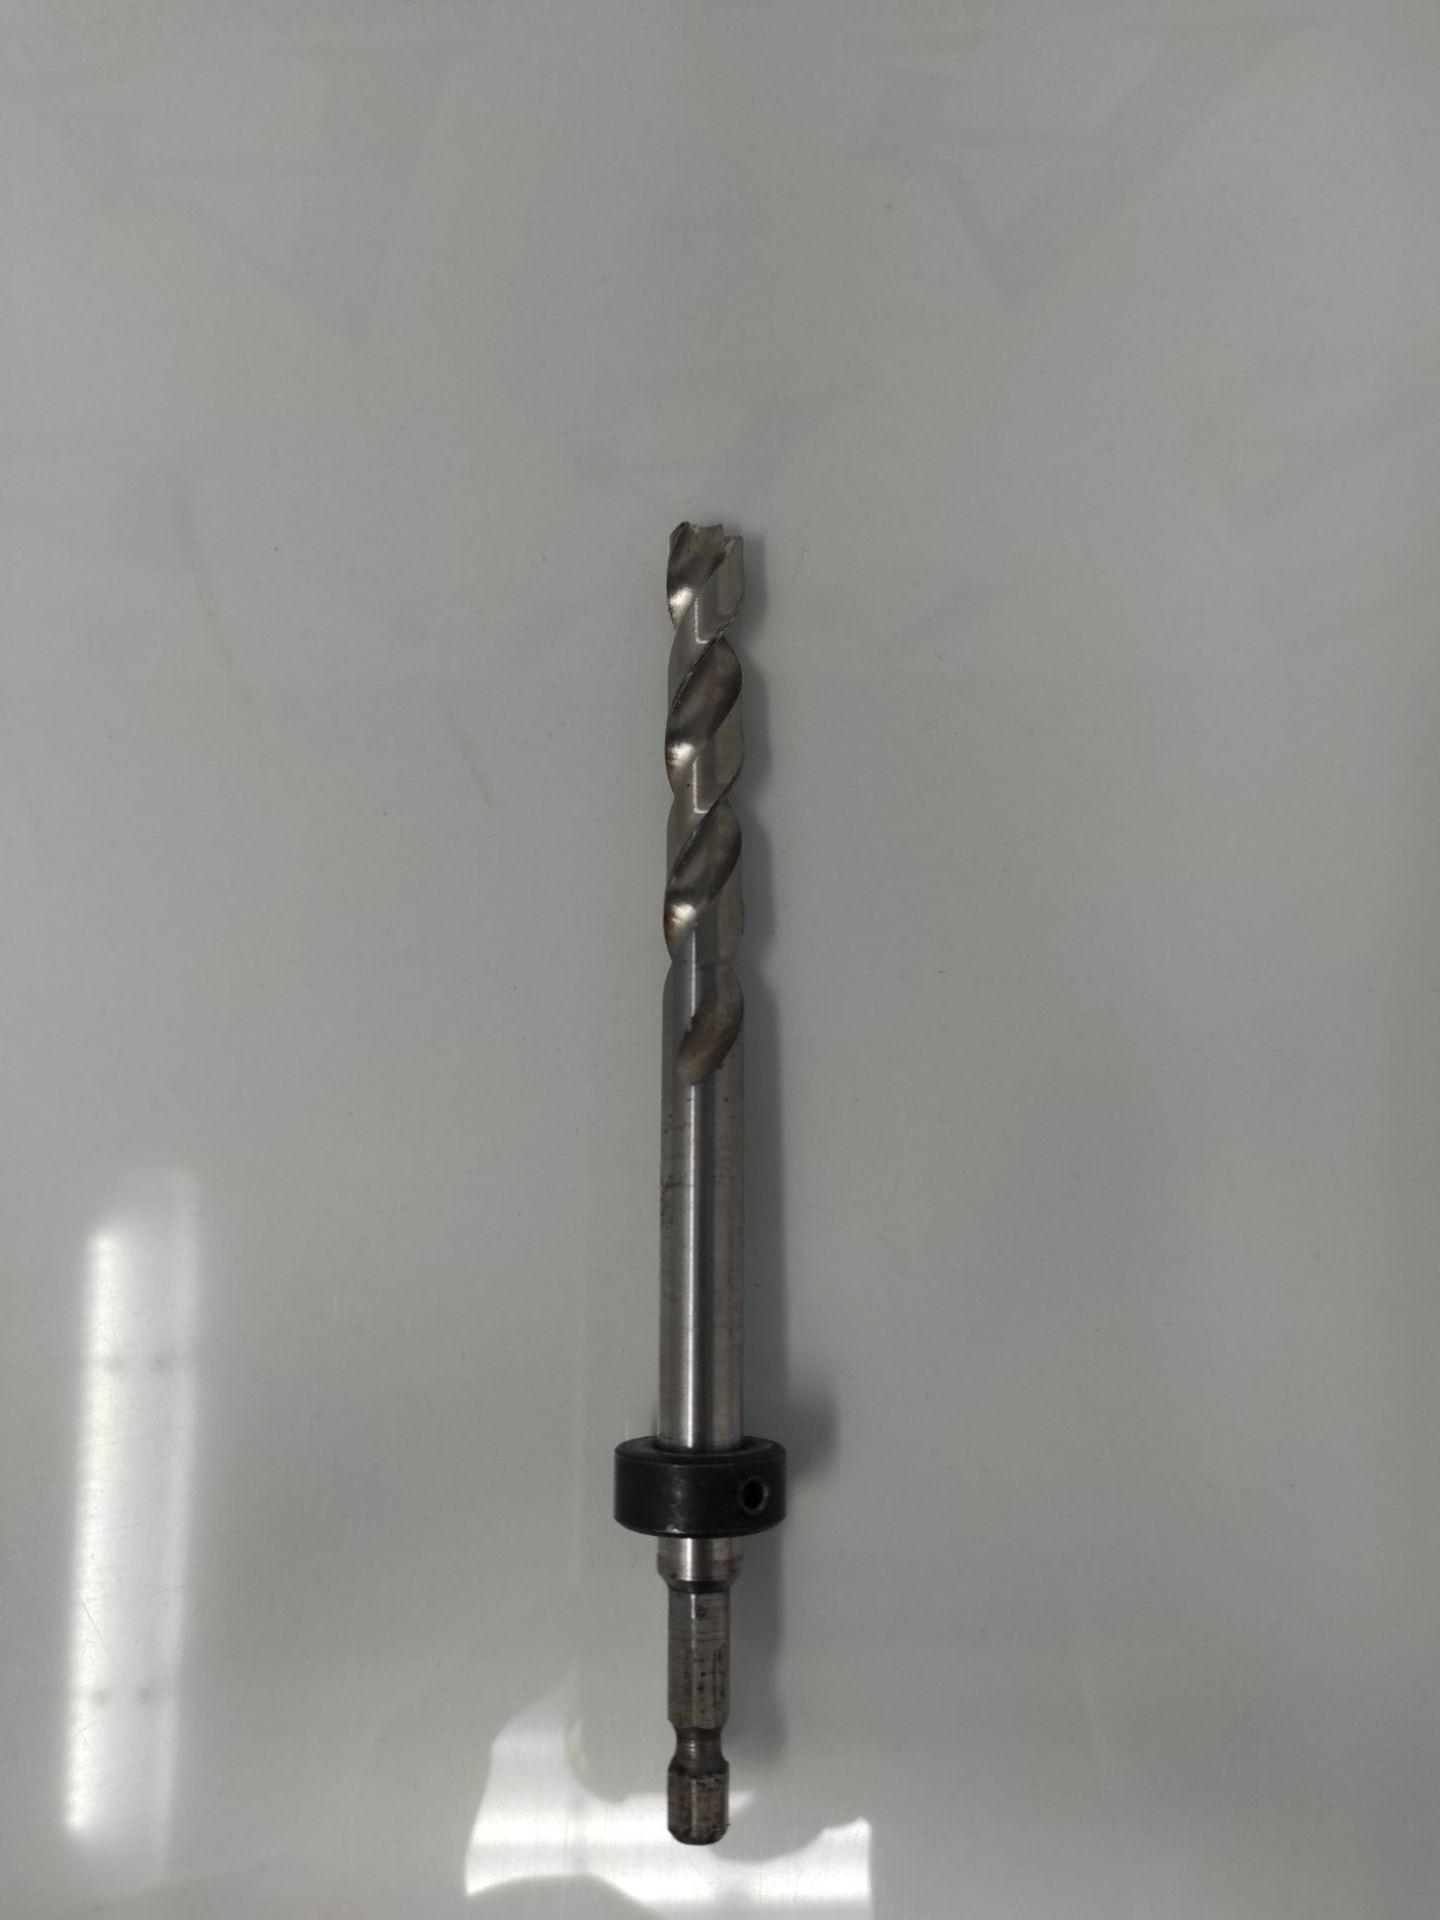 [INCOMPLETE] Kreg Easy-Set Pocket-Hole Drill Bit with Stop Collar & Gauge/Hex Wrench, - Image 2 of 2